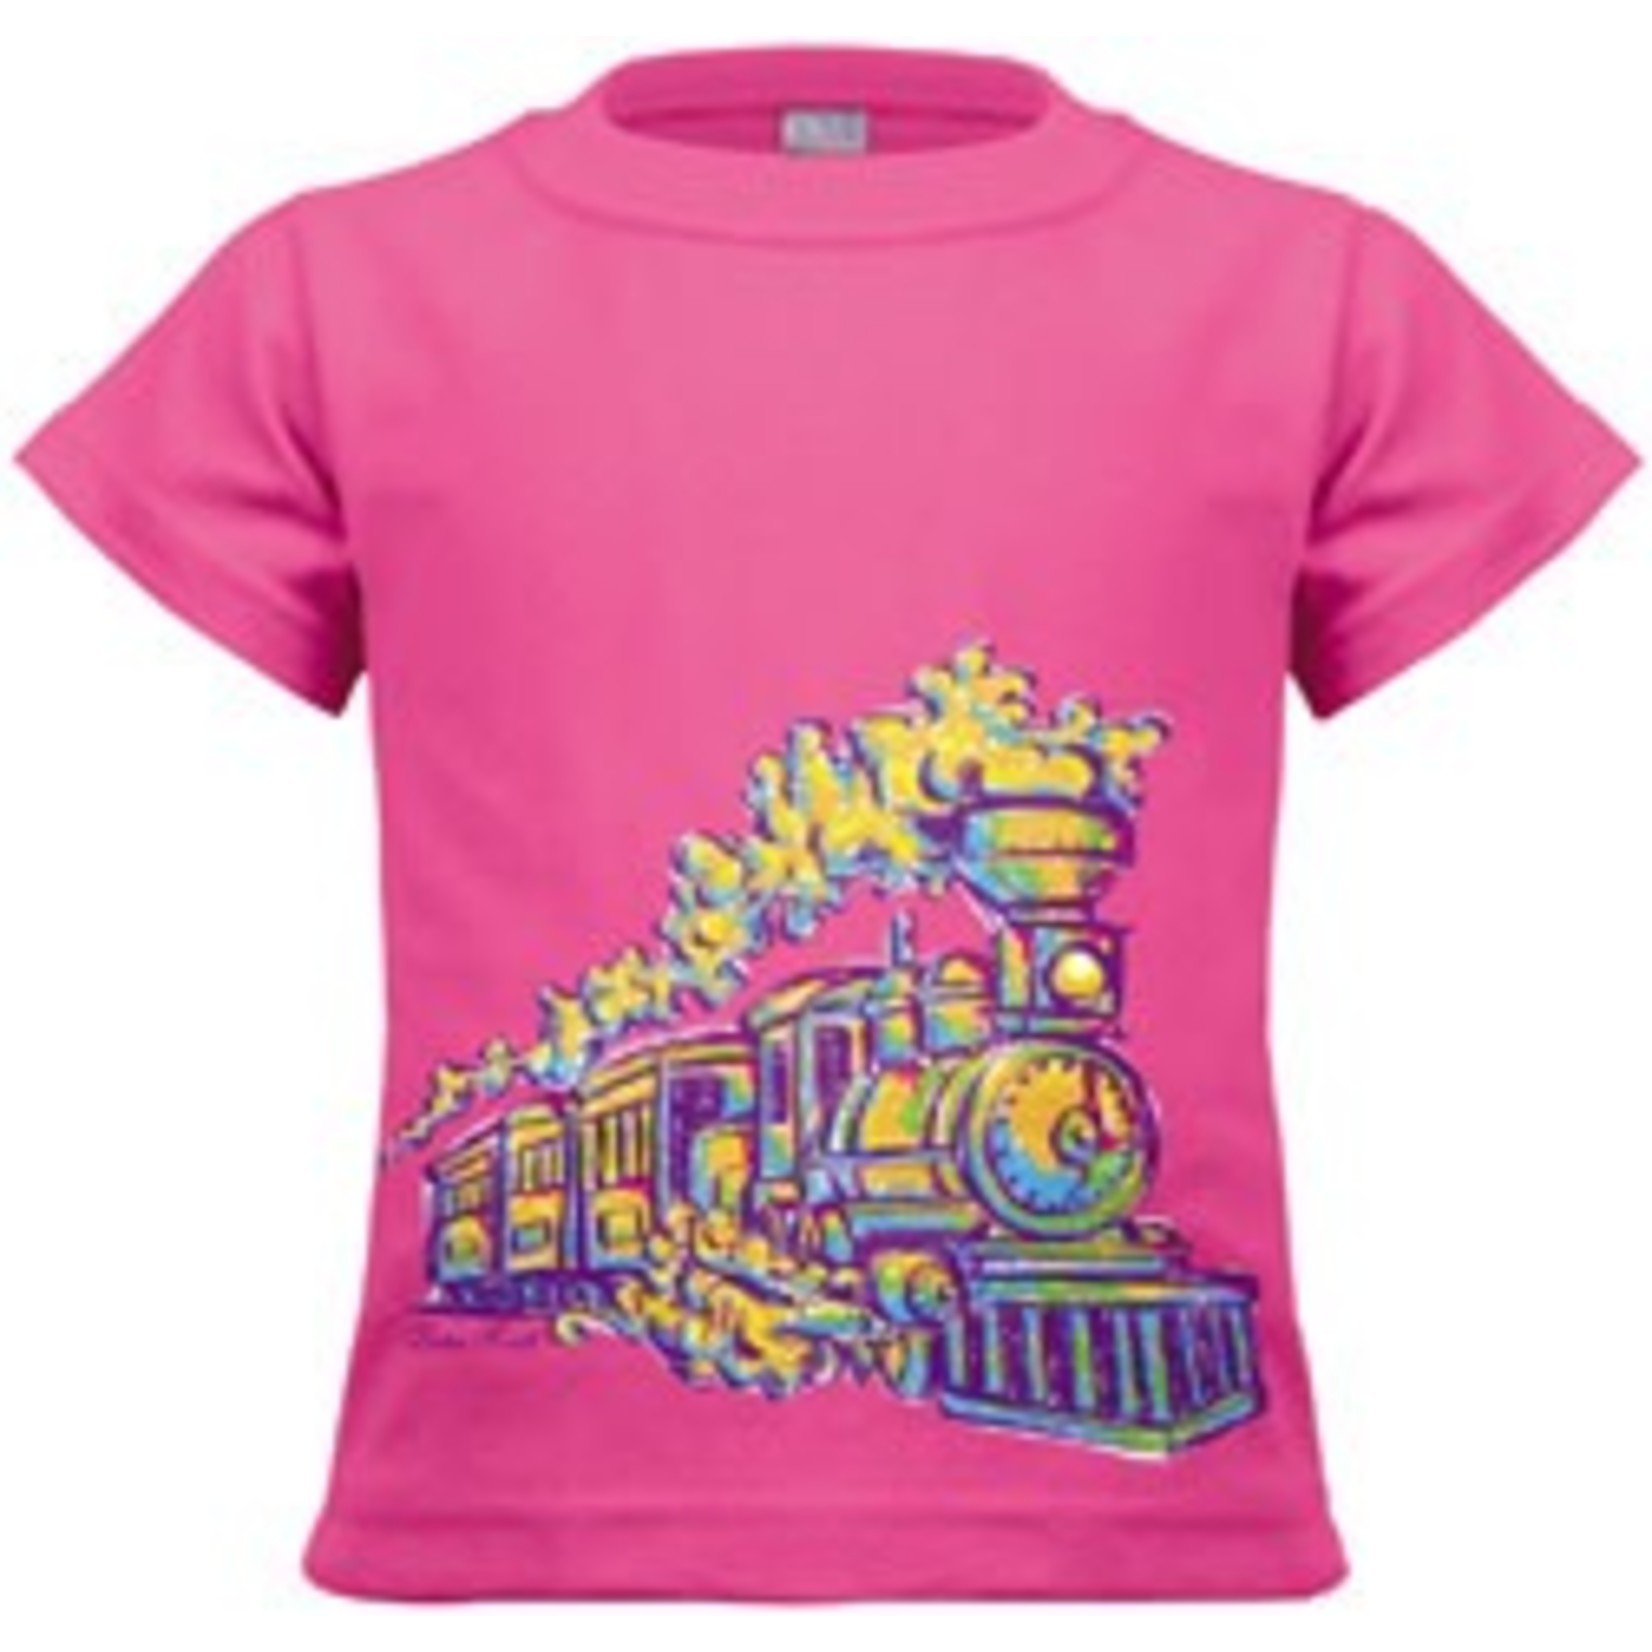 Born Rail Products Painted Train Toddler Shirt